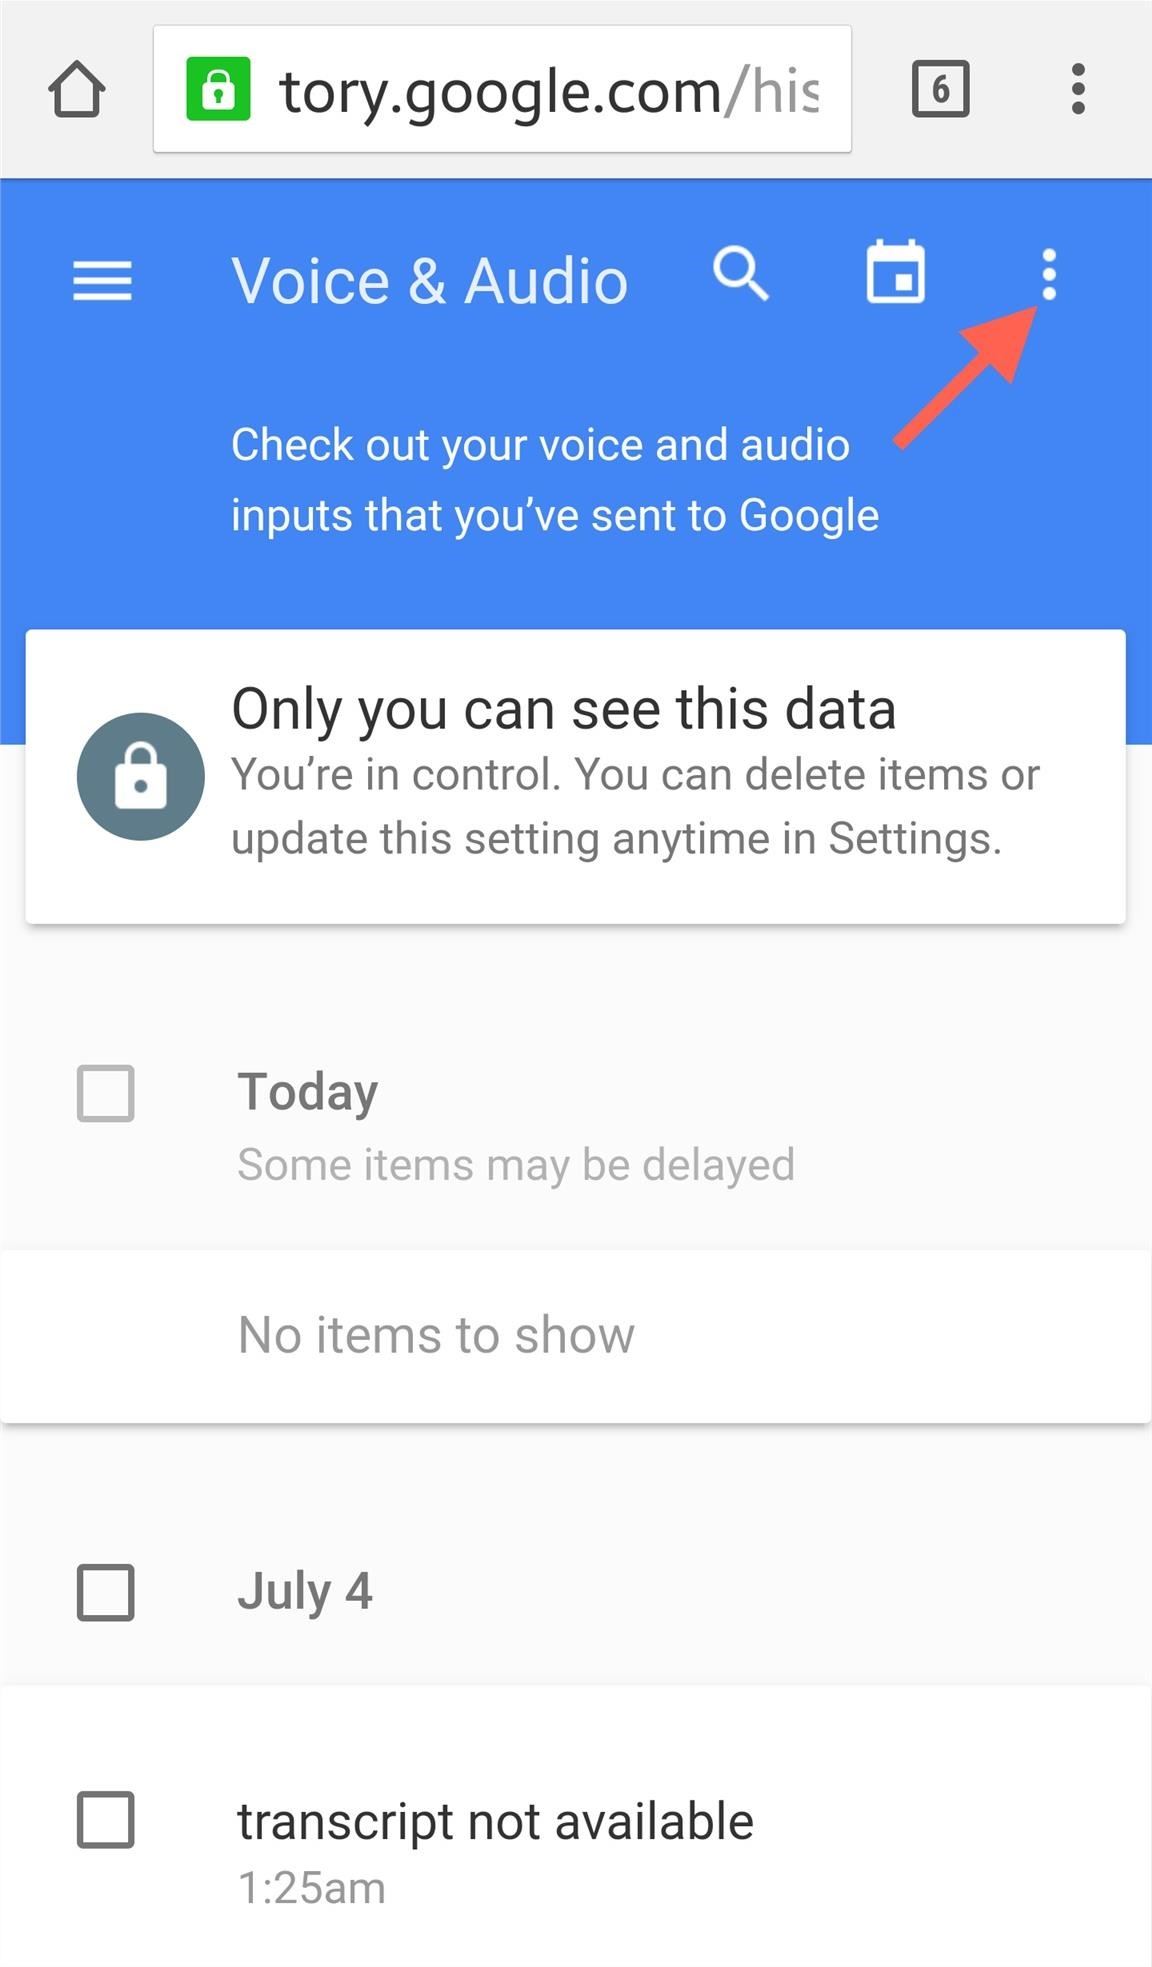 Google Stores Your Voice Search History—Here's How to Delete & Prevent It for Good